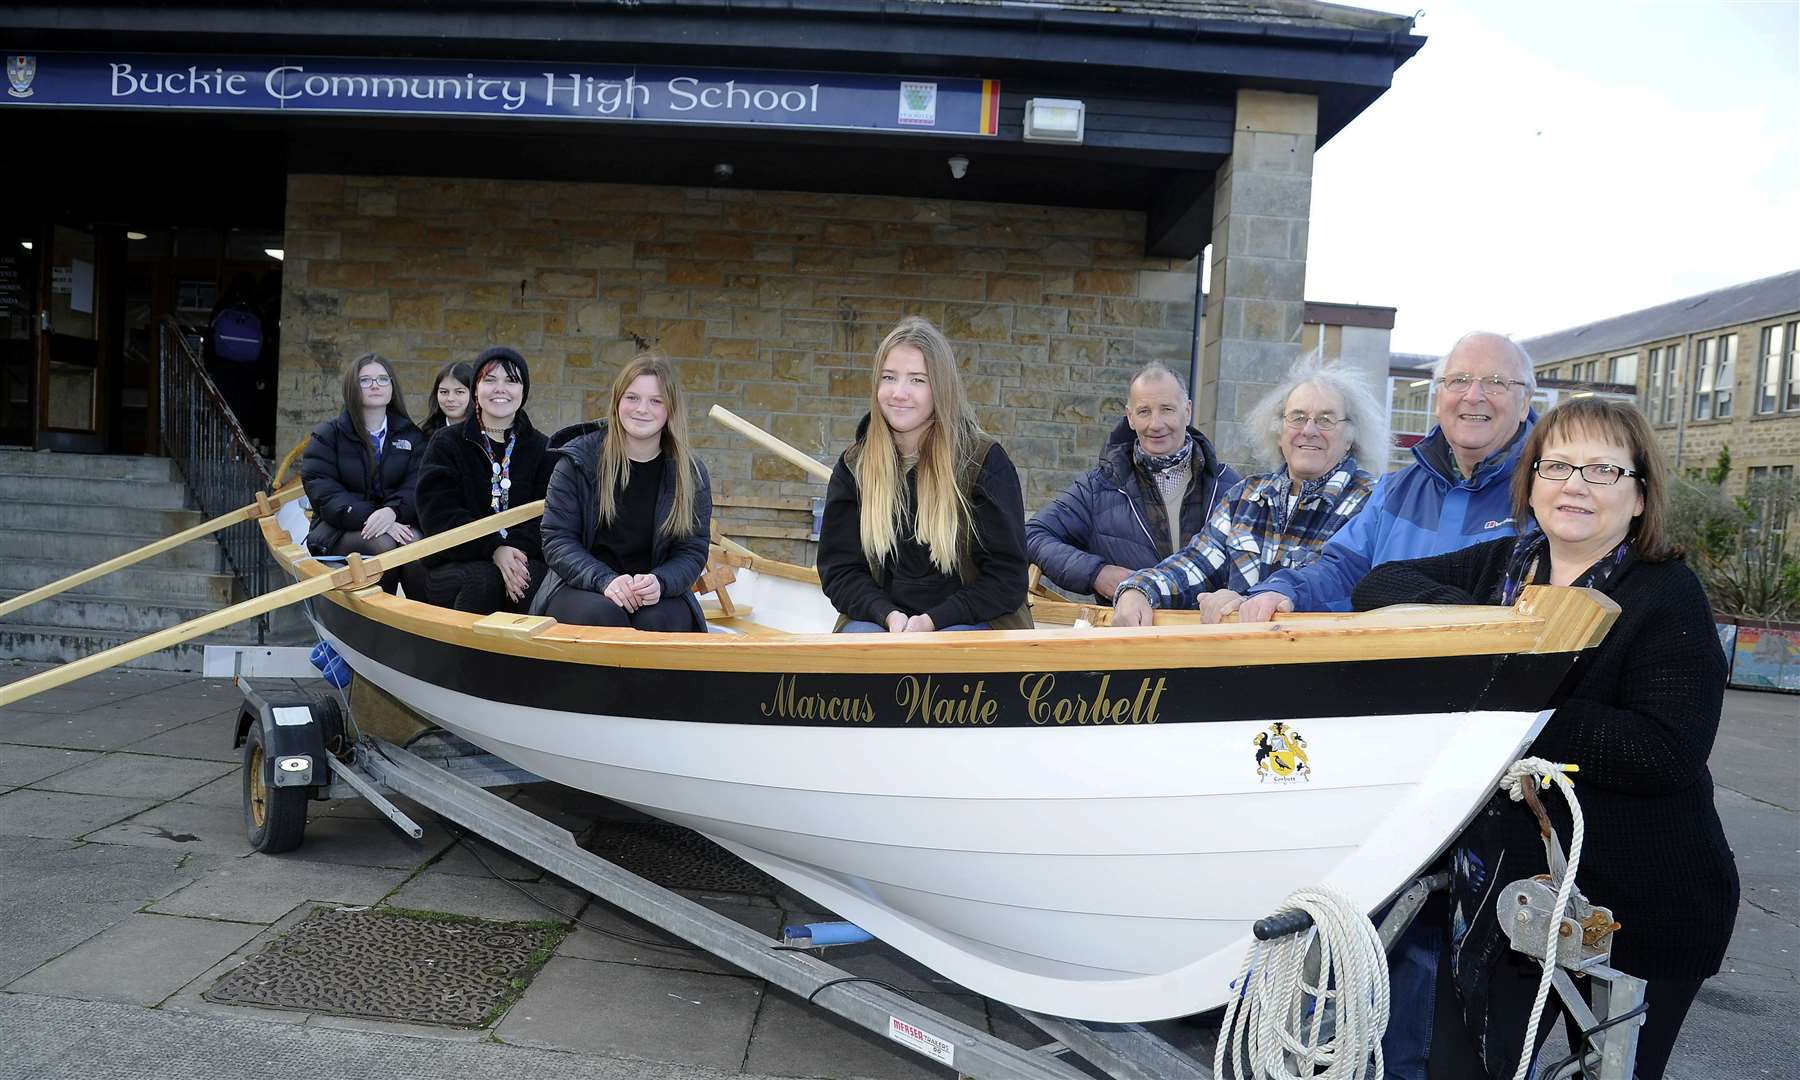 Cullen Sea School members (from left) Willie Henderson, Bert Reid, chairman Ashley Mowat and Councillor Sonya Warren are joined by Buckie High pupils (from back left) Adele Grant, Niamh Fraser, Ellis Boyfield, Tyler Aitken and Charlie Wood during the school's COP26 week. Picture: Becky Saunderson.